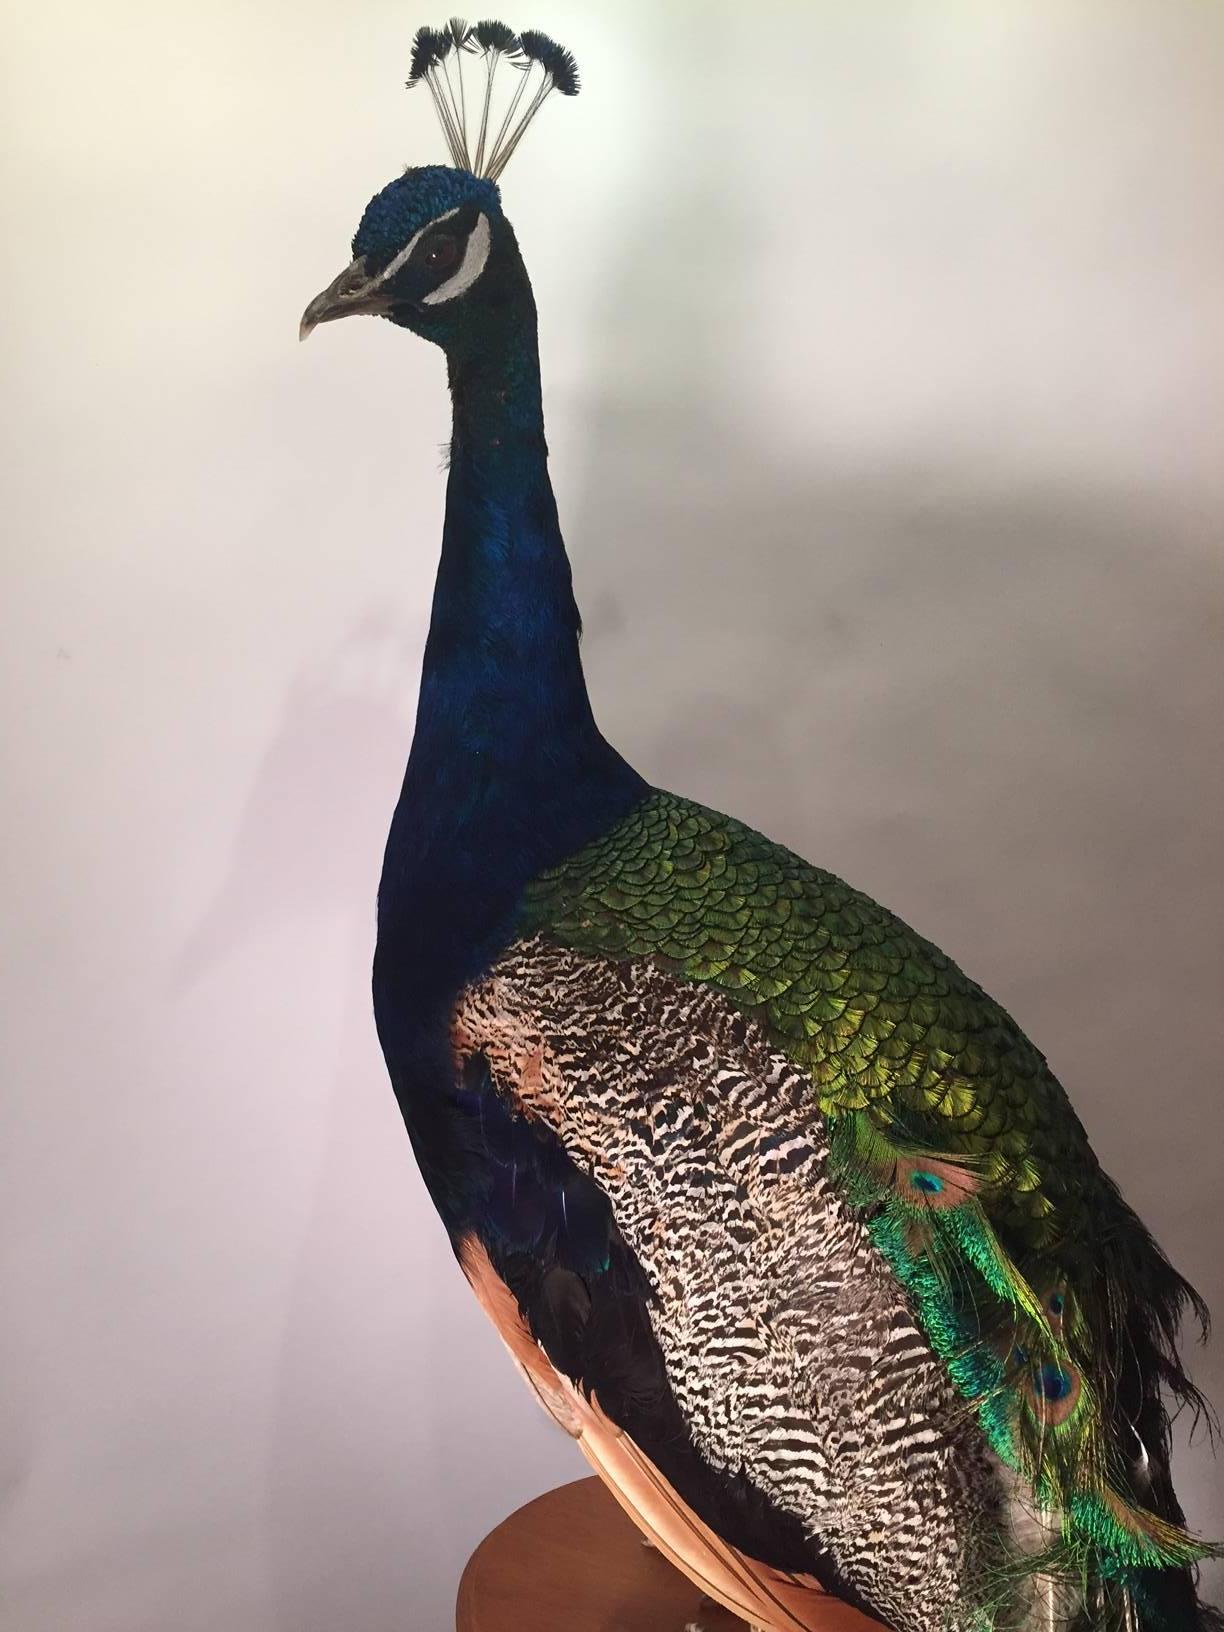 Indian blue peacock taxidermy mount with beautiful iridescent blue and green coloration. It is mounted on an oval wooden base and can be displayed by placement on a wall bracket, mantelpiece or Stand. There are many possible display options as the